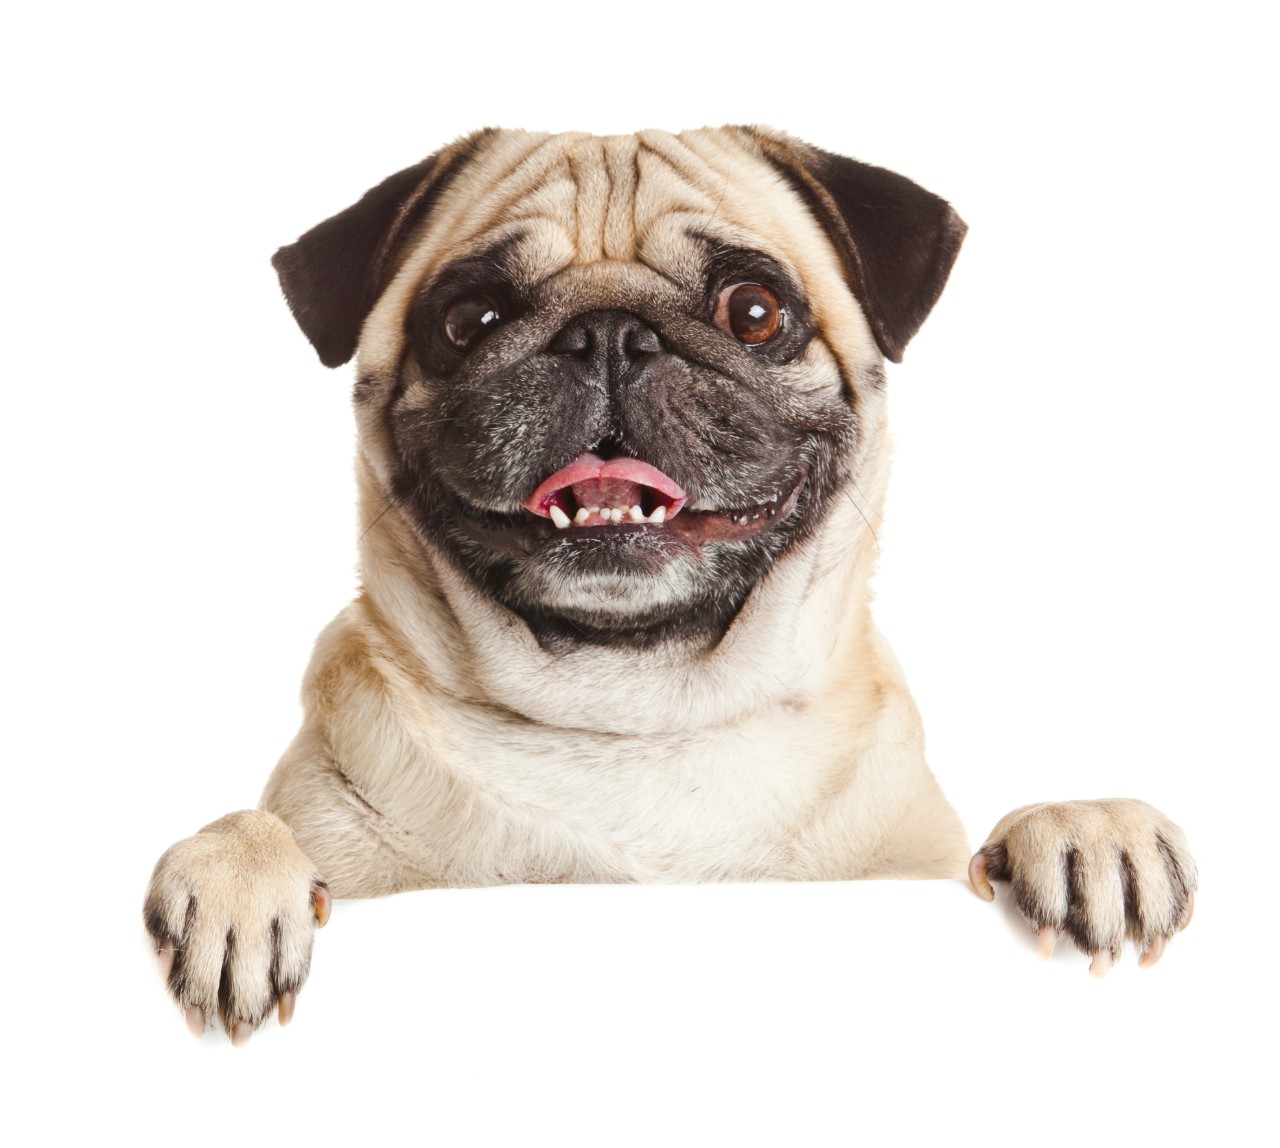 Pug – Friendly, Calm and Affectionate